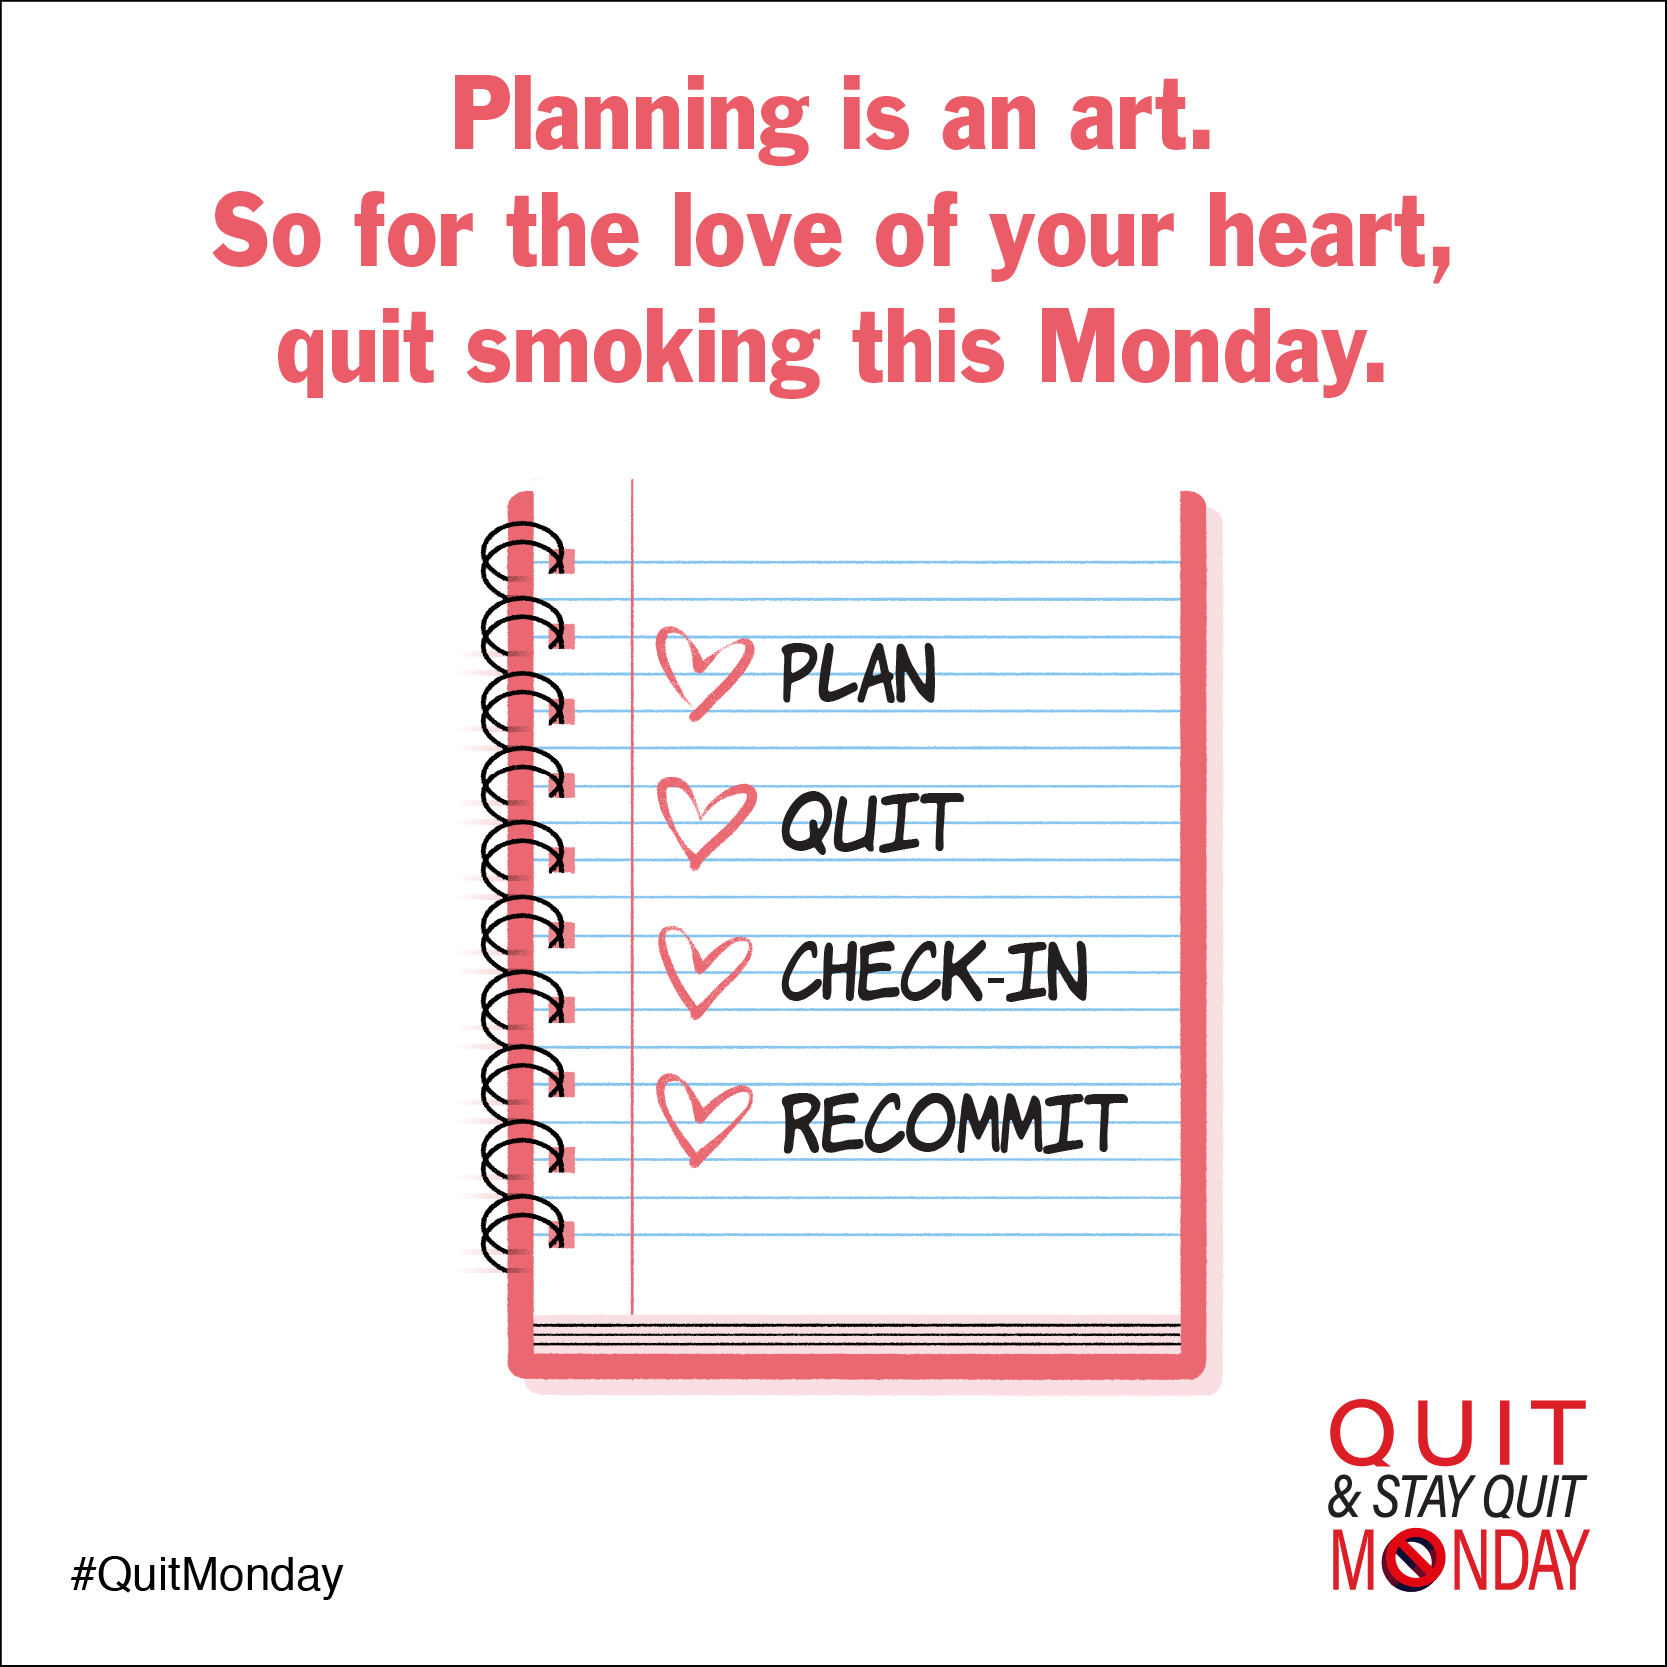 Planning is an art. So for the love of your heart, quit smoking this Monday.